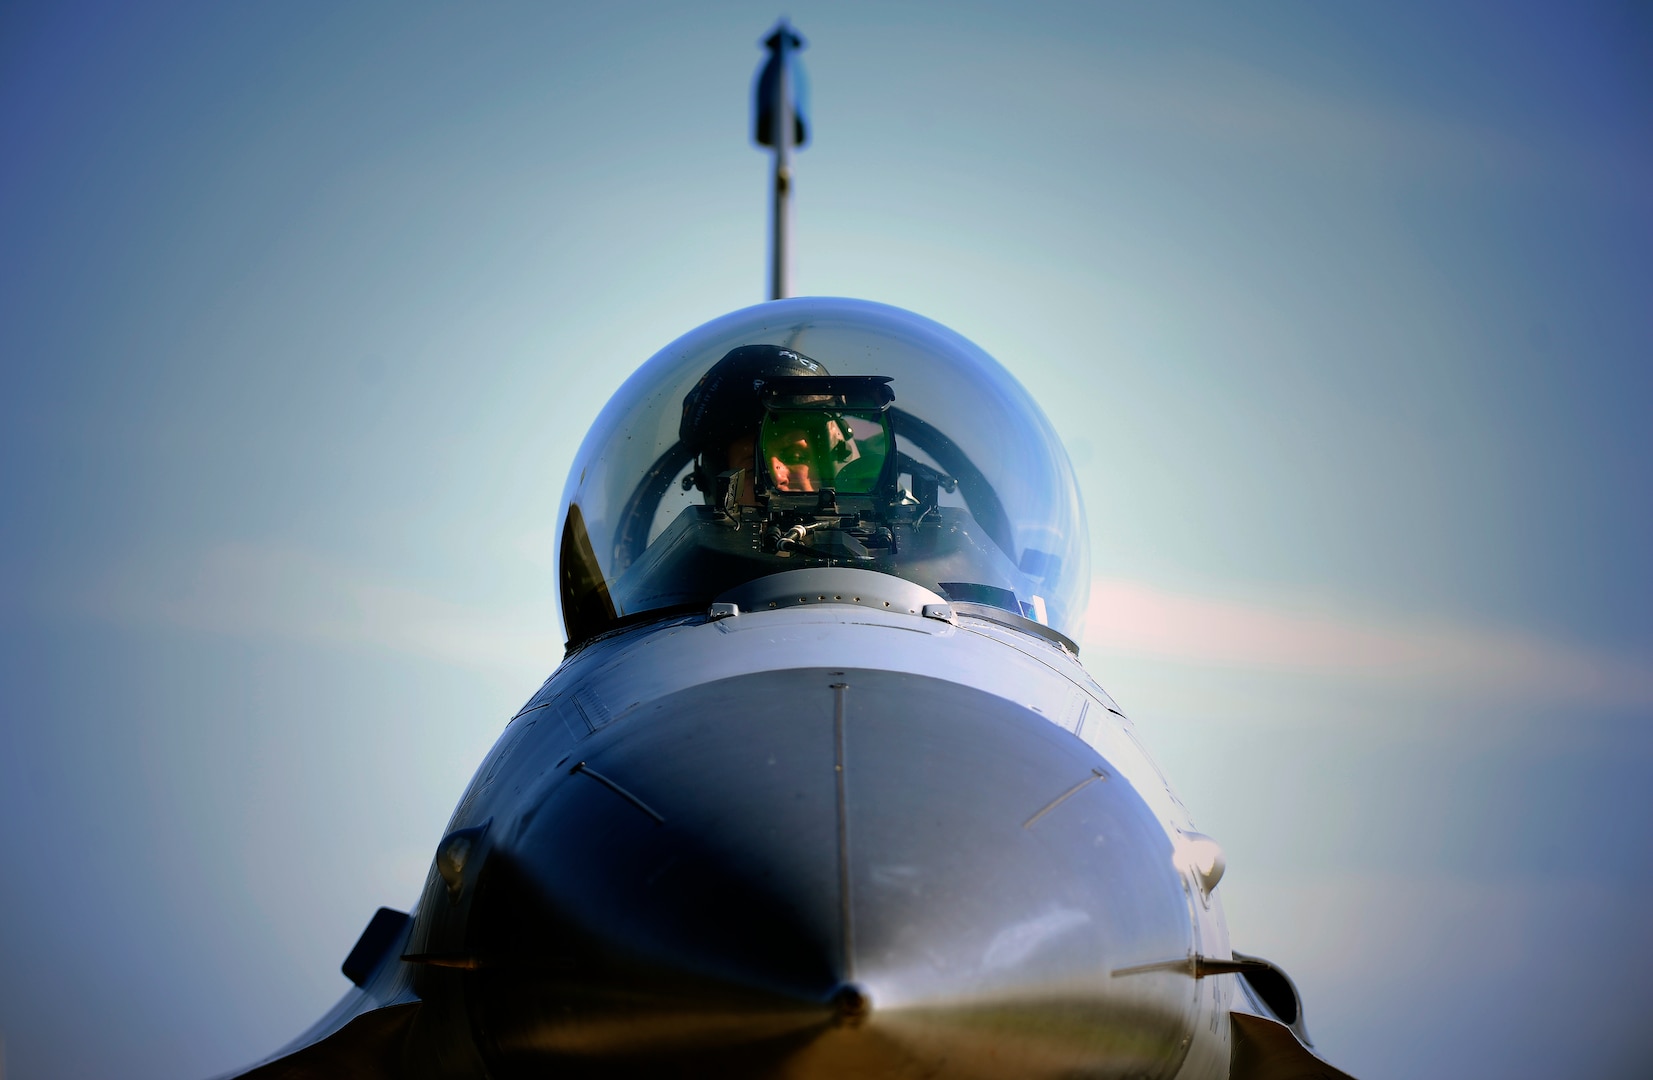 1st Lt. Brad Leffler, 35th Fighter Squadron F-16 Fighting Falcon pilot, prepares for takeoff during Exercise Buddy Wing 15-4 at Kunsan Air Base, Republic of Korea, June 3, 2015. In an effort to enhance U.S. and ROKAF combat capability, Buddy Wing exercises are conducted multiple times throughout the year on the peninsula to sharpen interoperability between the allied forces so that if need be, they are always ready to fight as a combined force. (U.S. Air Force photo by Staff Sgt. Nick Wilson/Released)